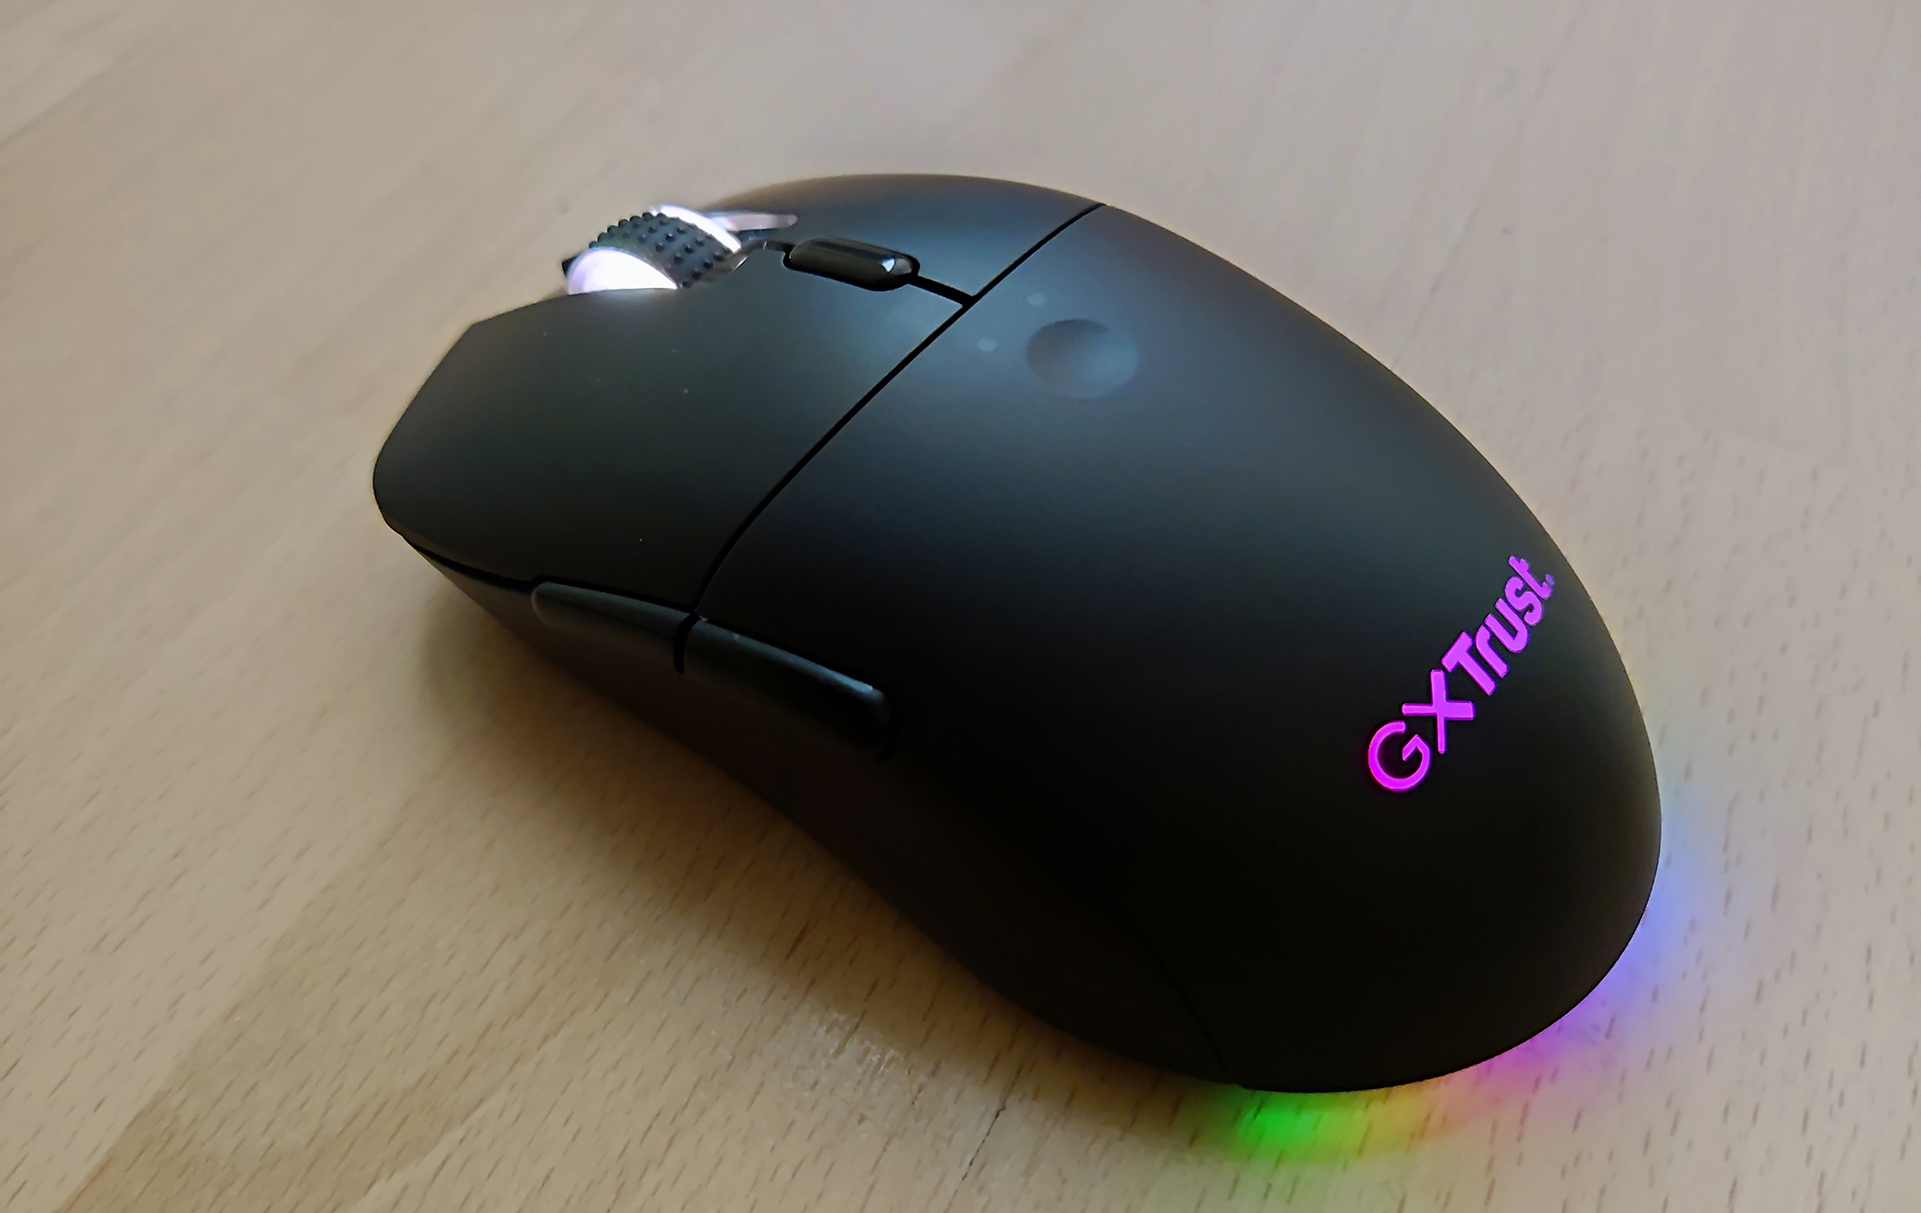 Trust: here is the new GXT 980 REDEX wireless mouse